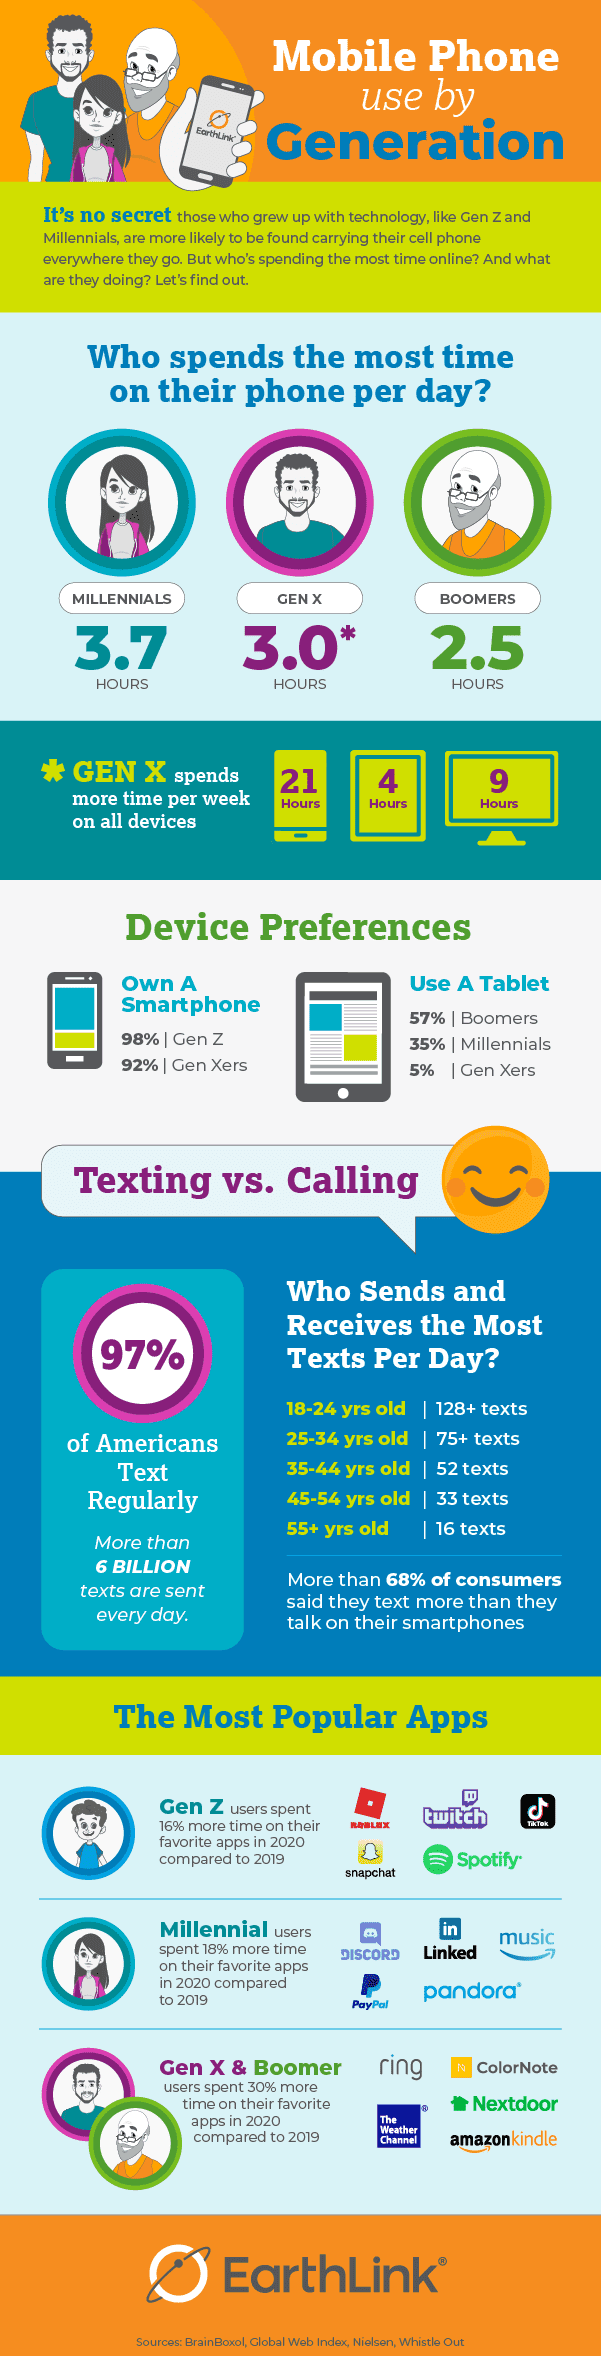 Infographic about mobile phone usage and how it varies by generation